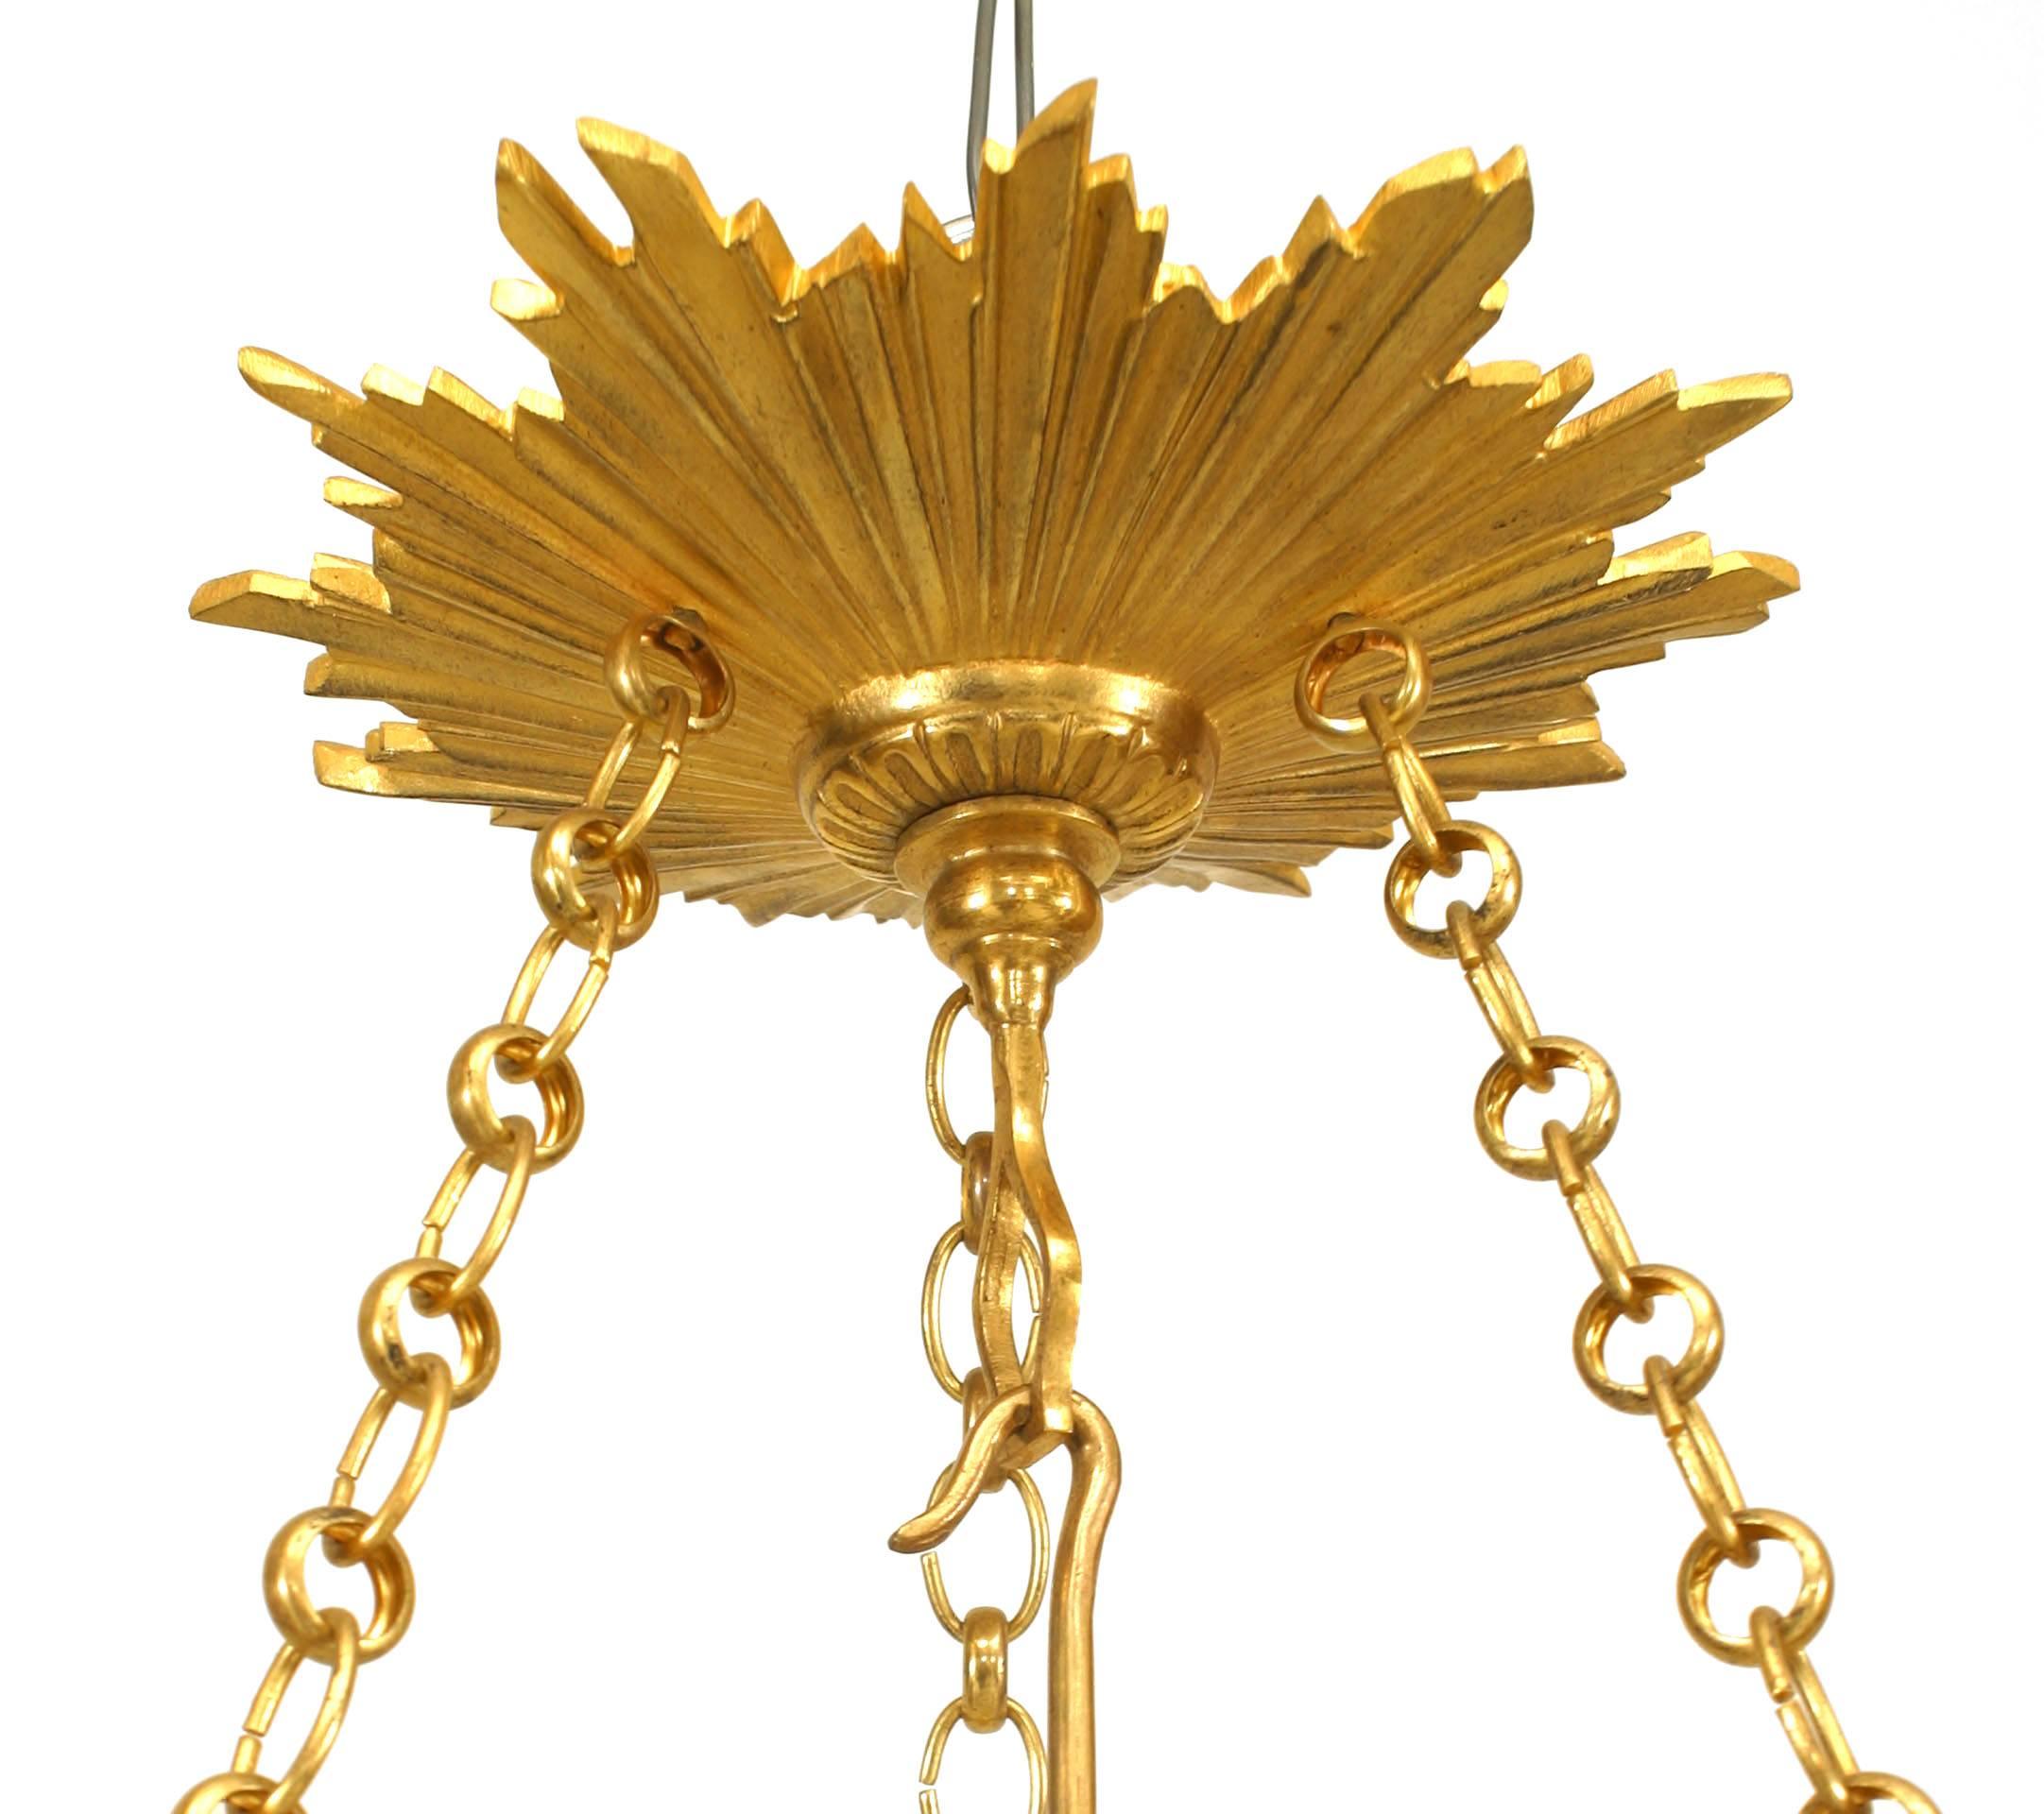 French Louis XVI style ormolu lantern with chain suspended glass canopy with ram headed Vitruvian scrolled rim and three arms from a central rod (20th century).
 